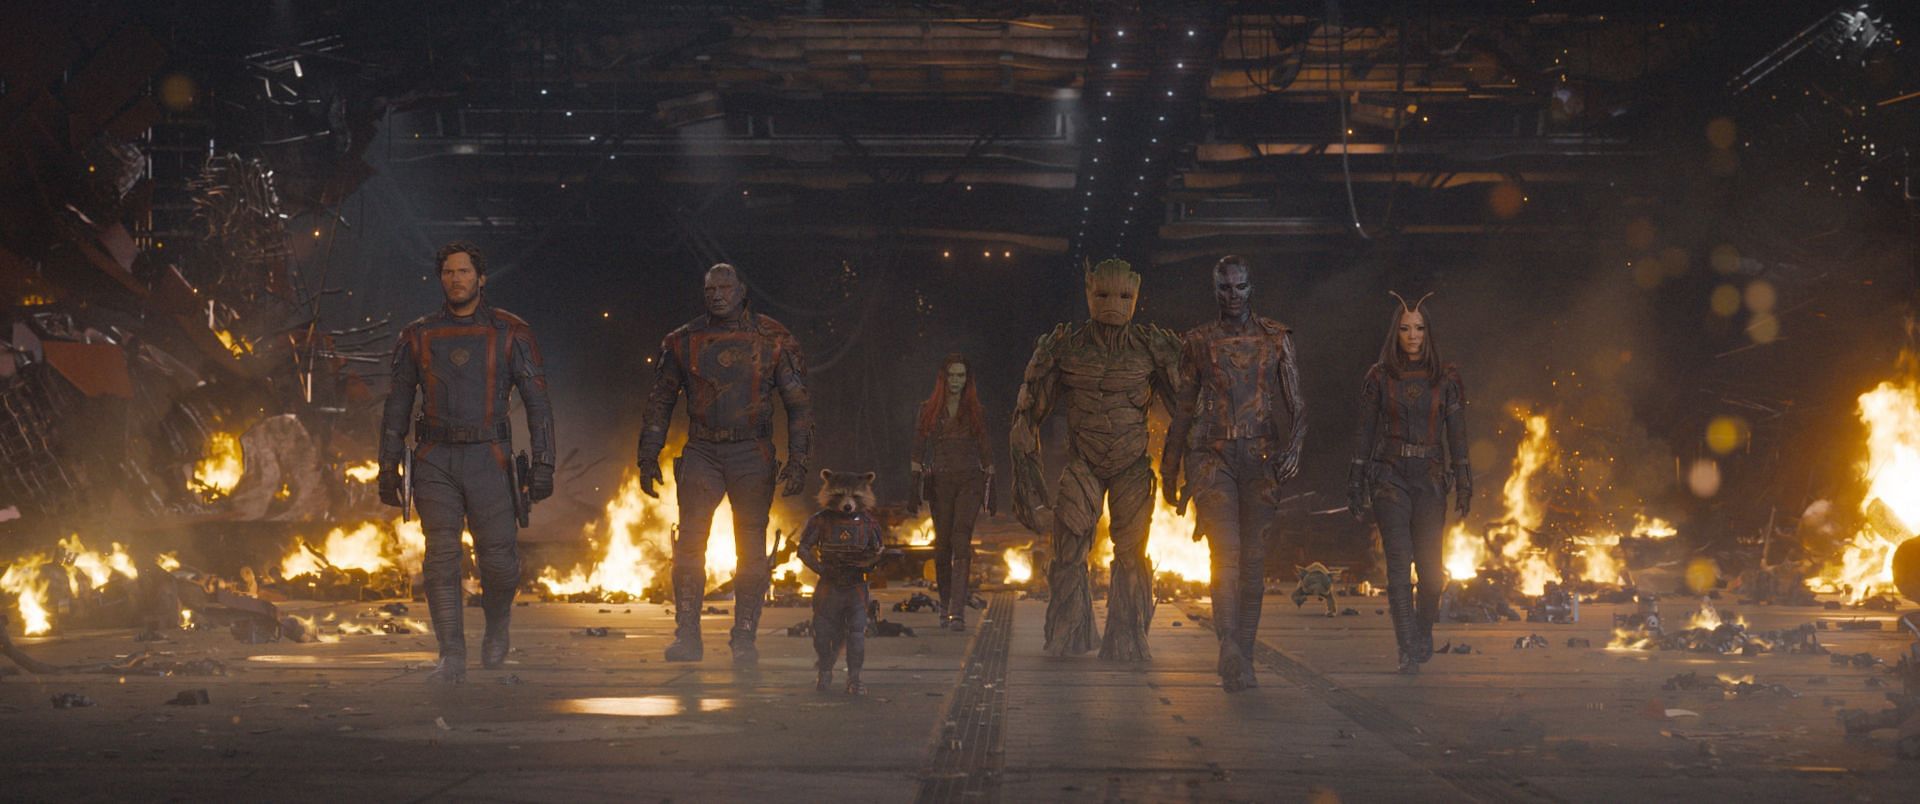 Get ready for an epic ride with the Guardians of the Galaxy as they take their final bow in the highly anticipated Vol. 3 (Image via Marvel Studios)